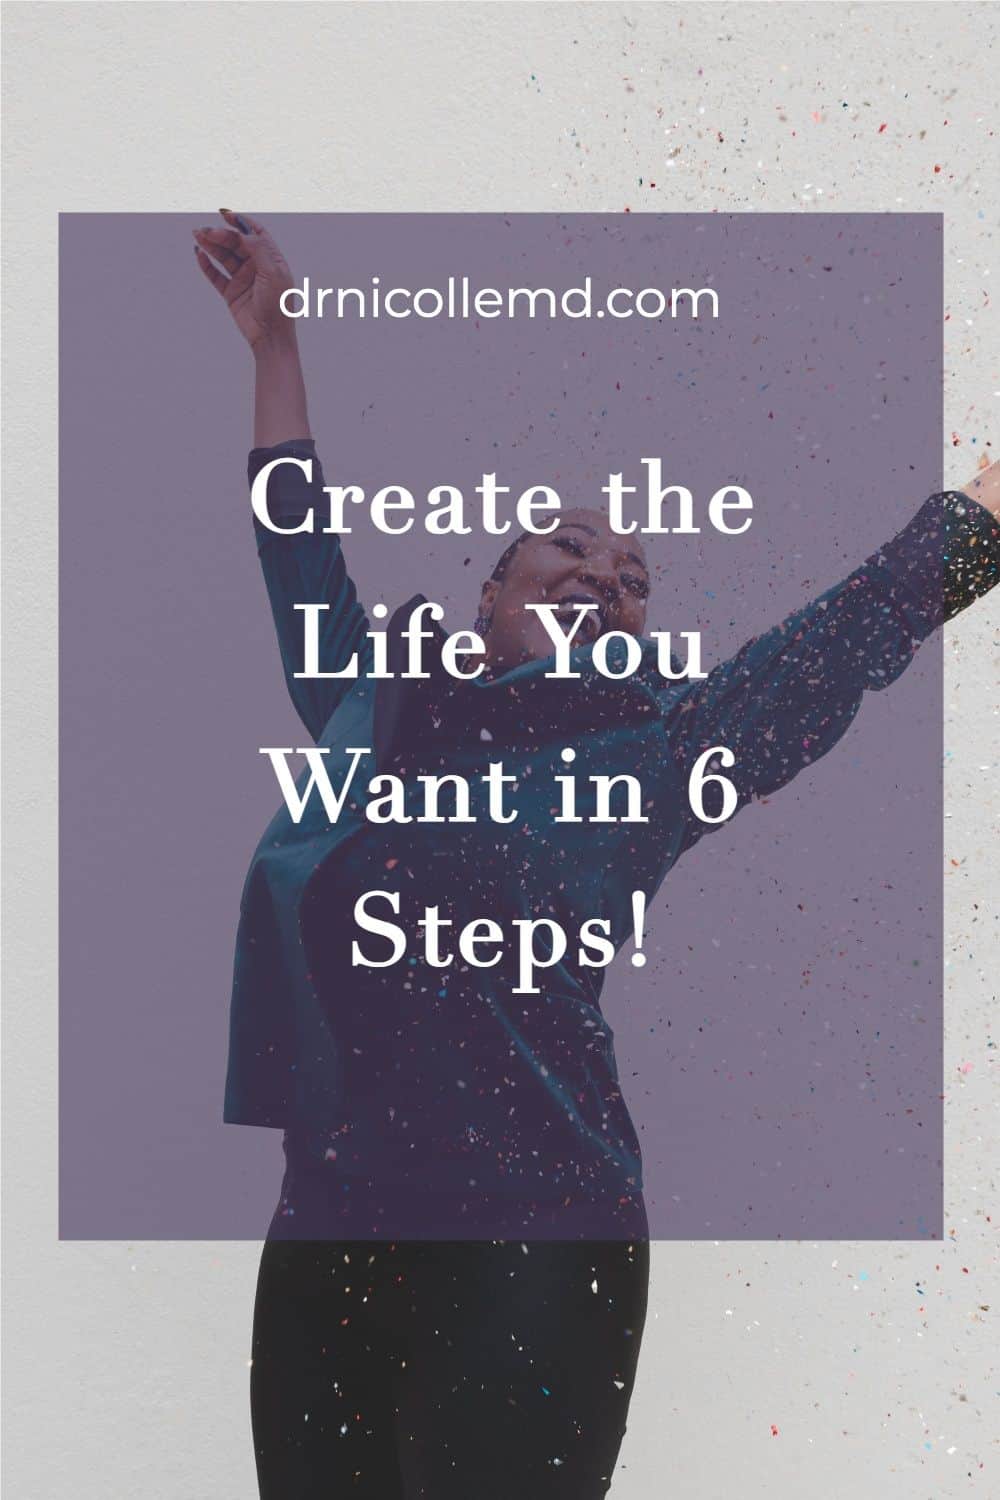 6 Steps to Create the Life You Want